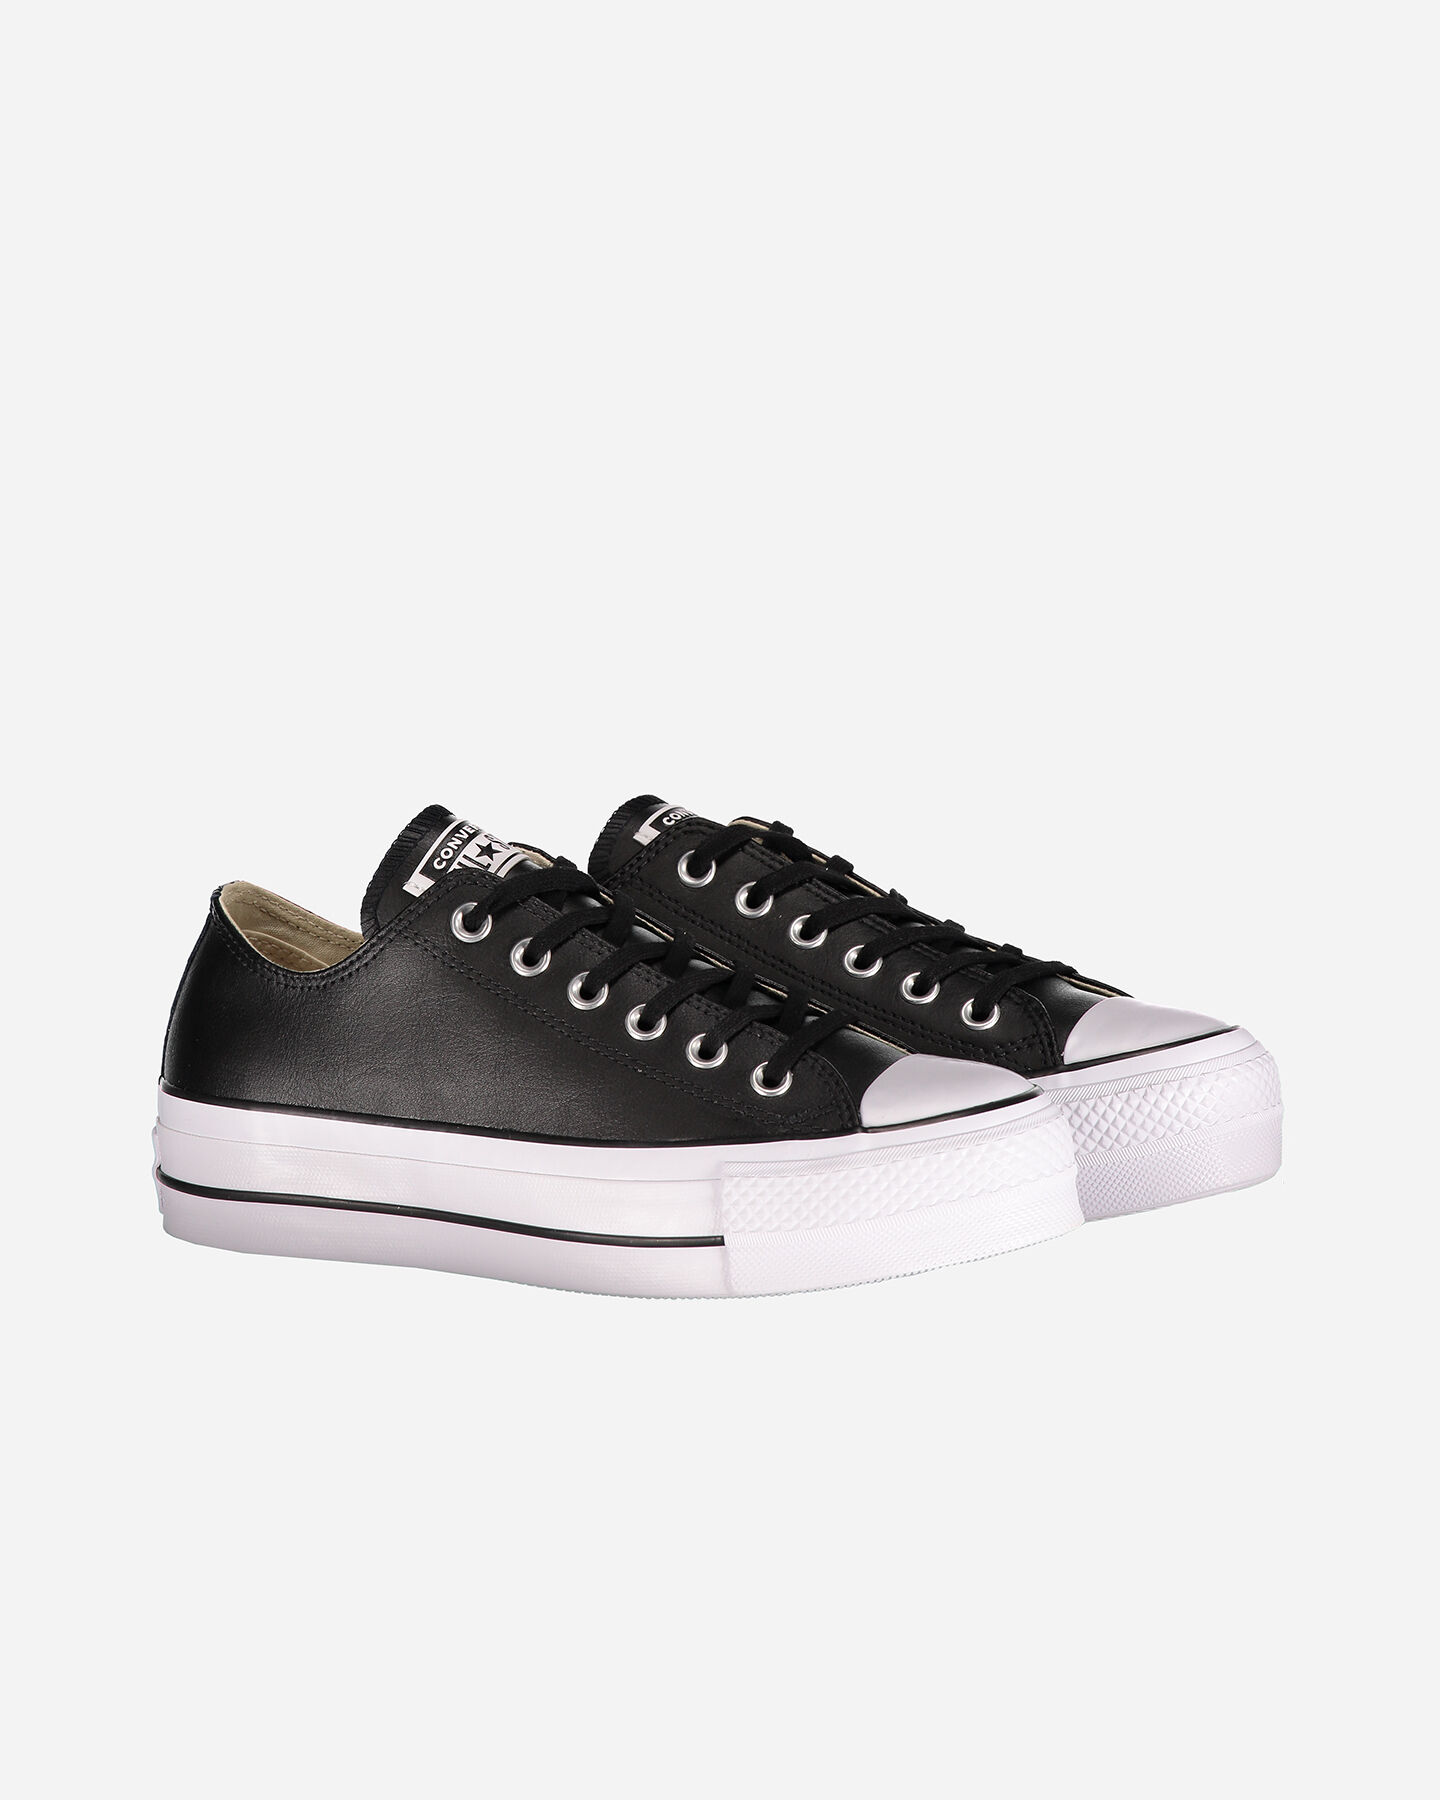  Scarpe sneakers CONVERSE ALL STAR PLATFORM LEATHER OX W S4051914|1|5,5 scatto 1